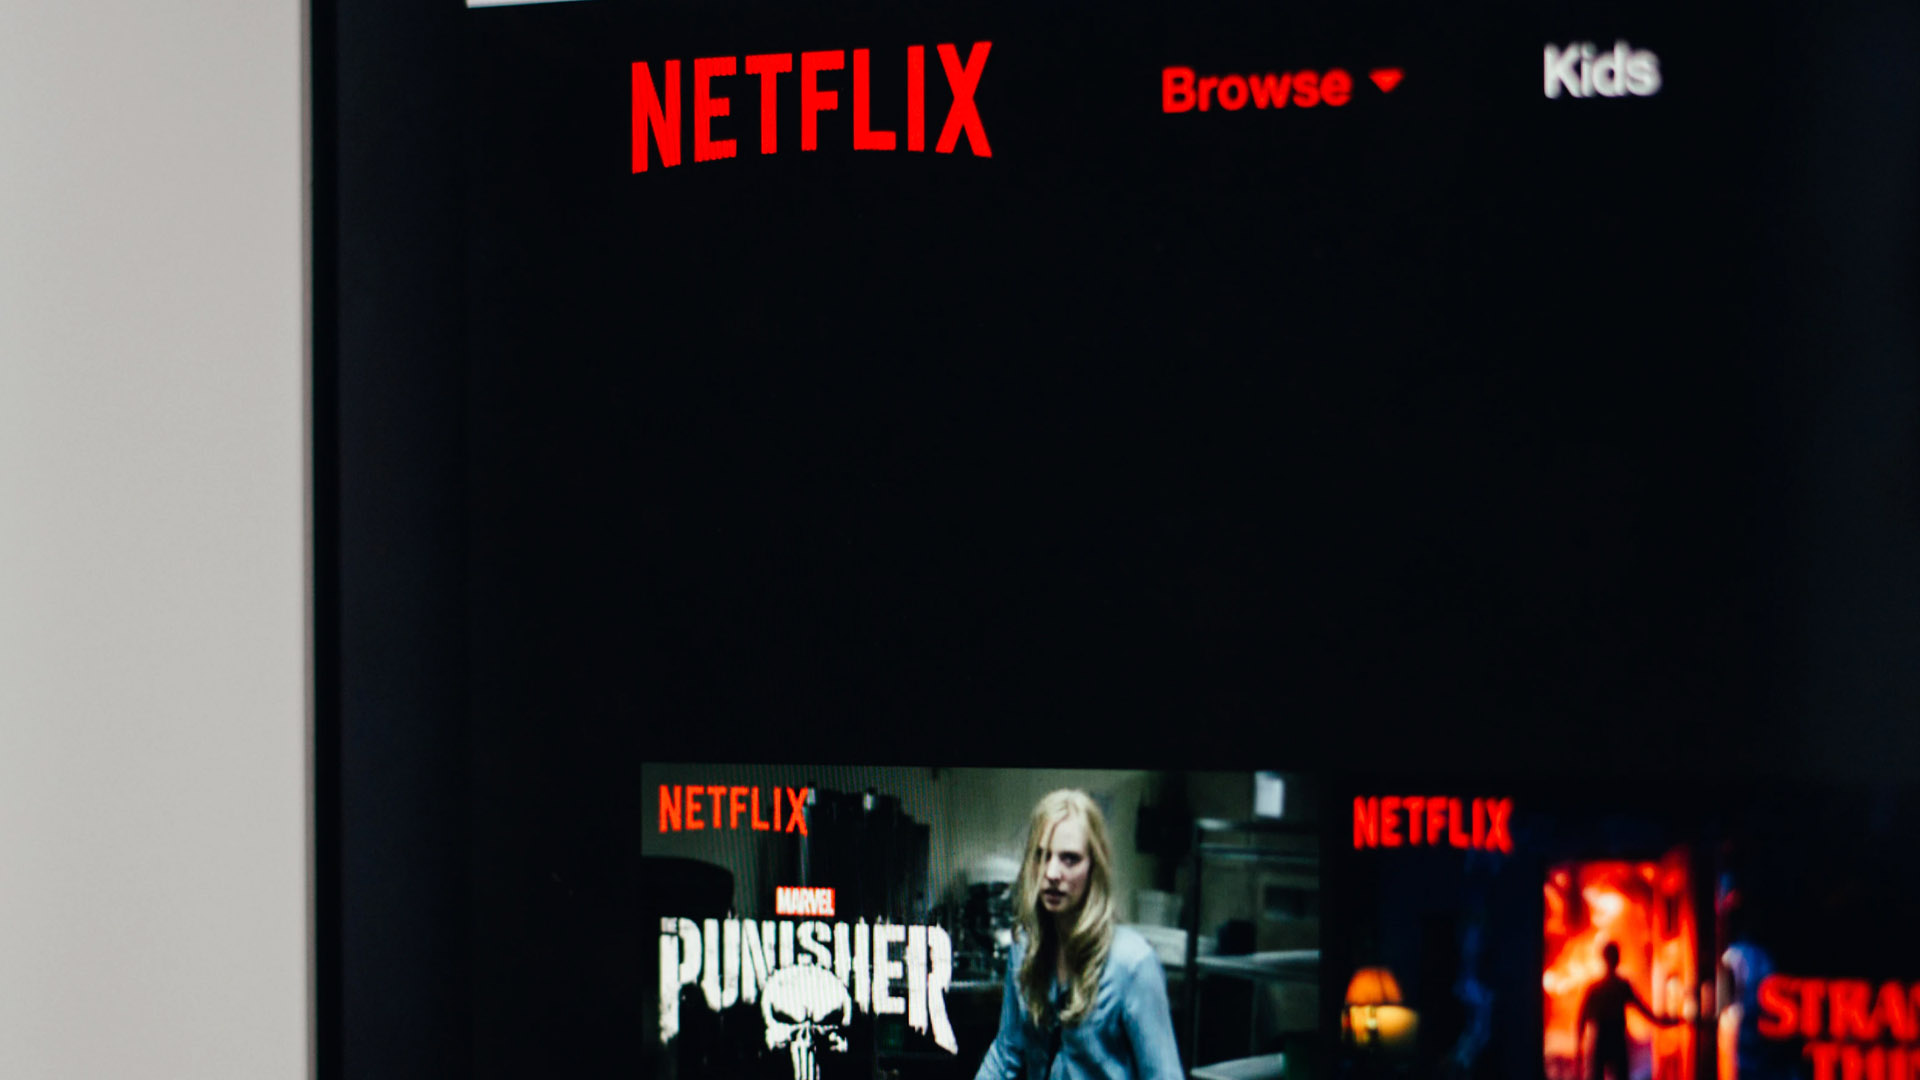 Netflix banning users who use a VPN to access restricted content